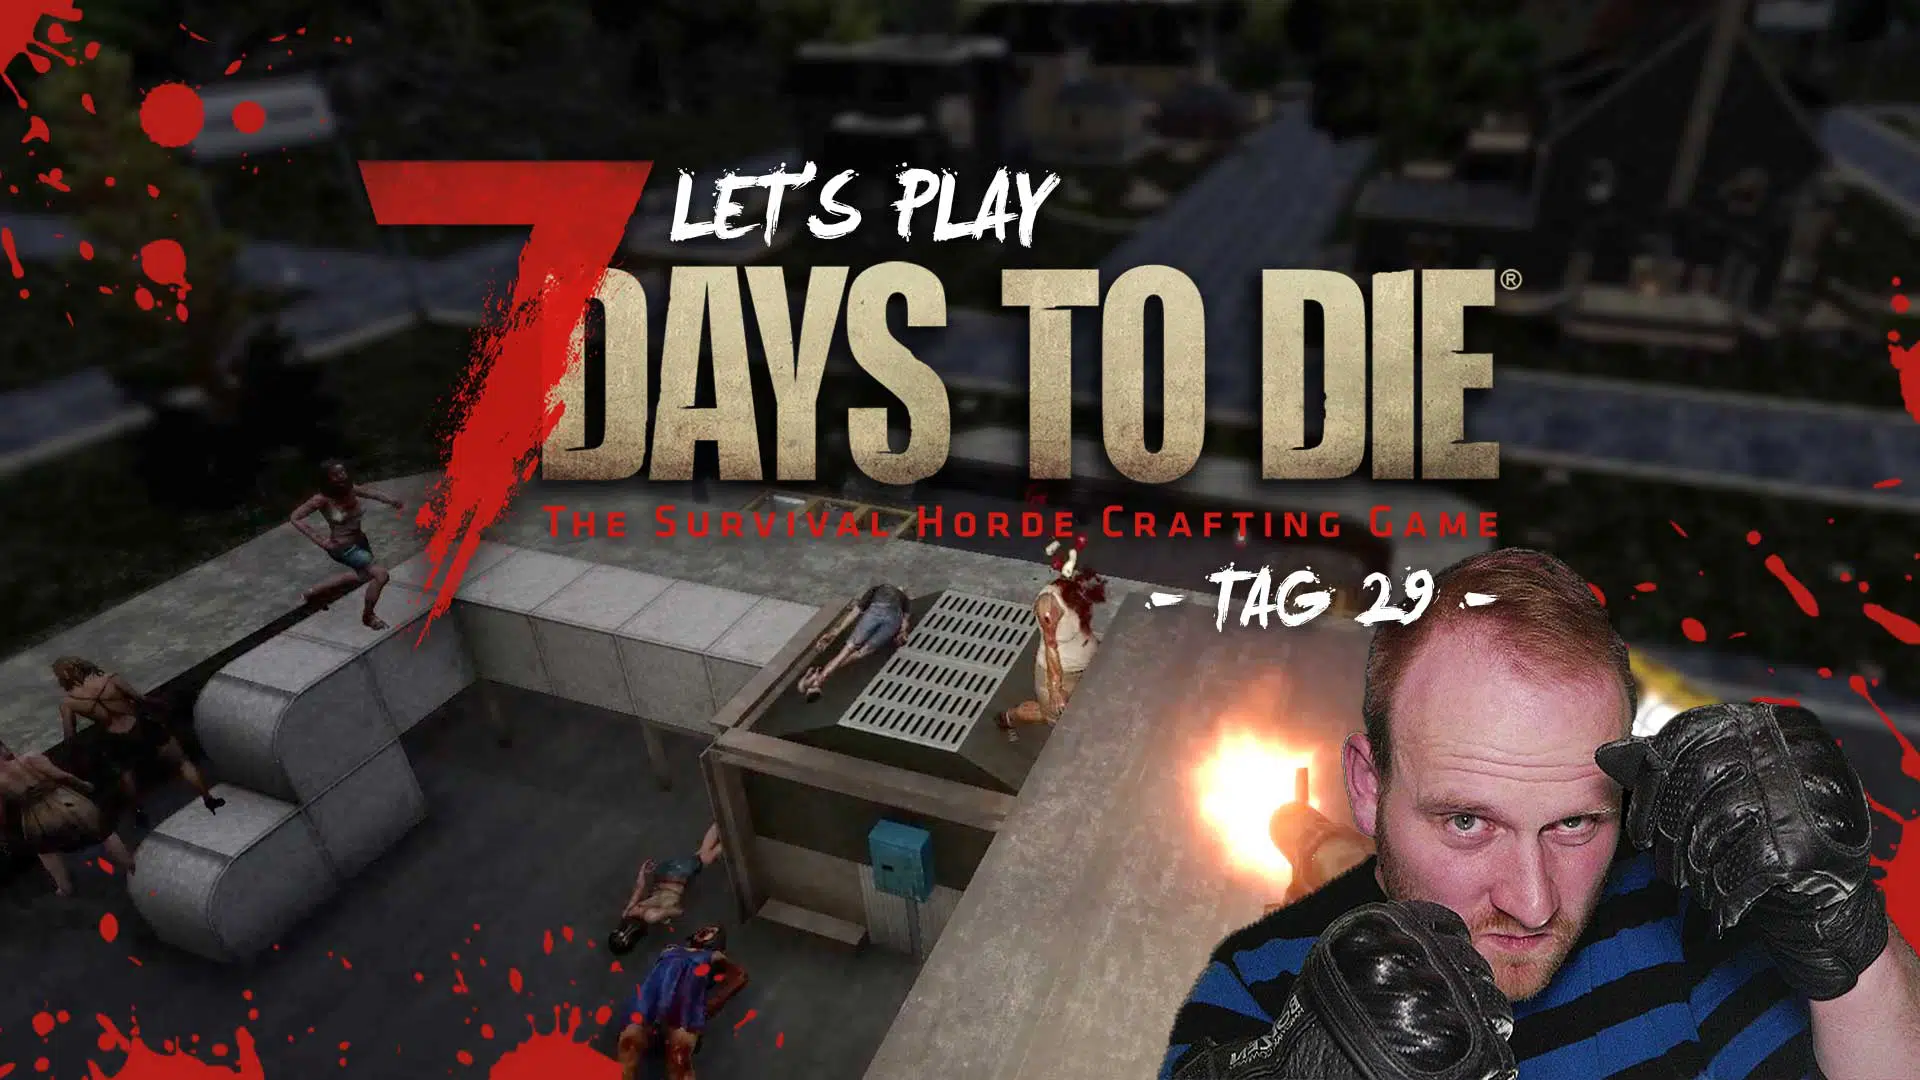 lets play 7 days to die tag 29 GG